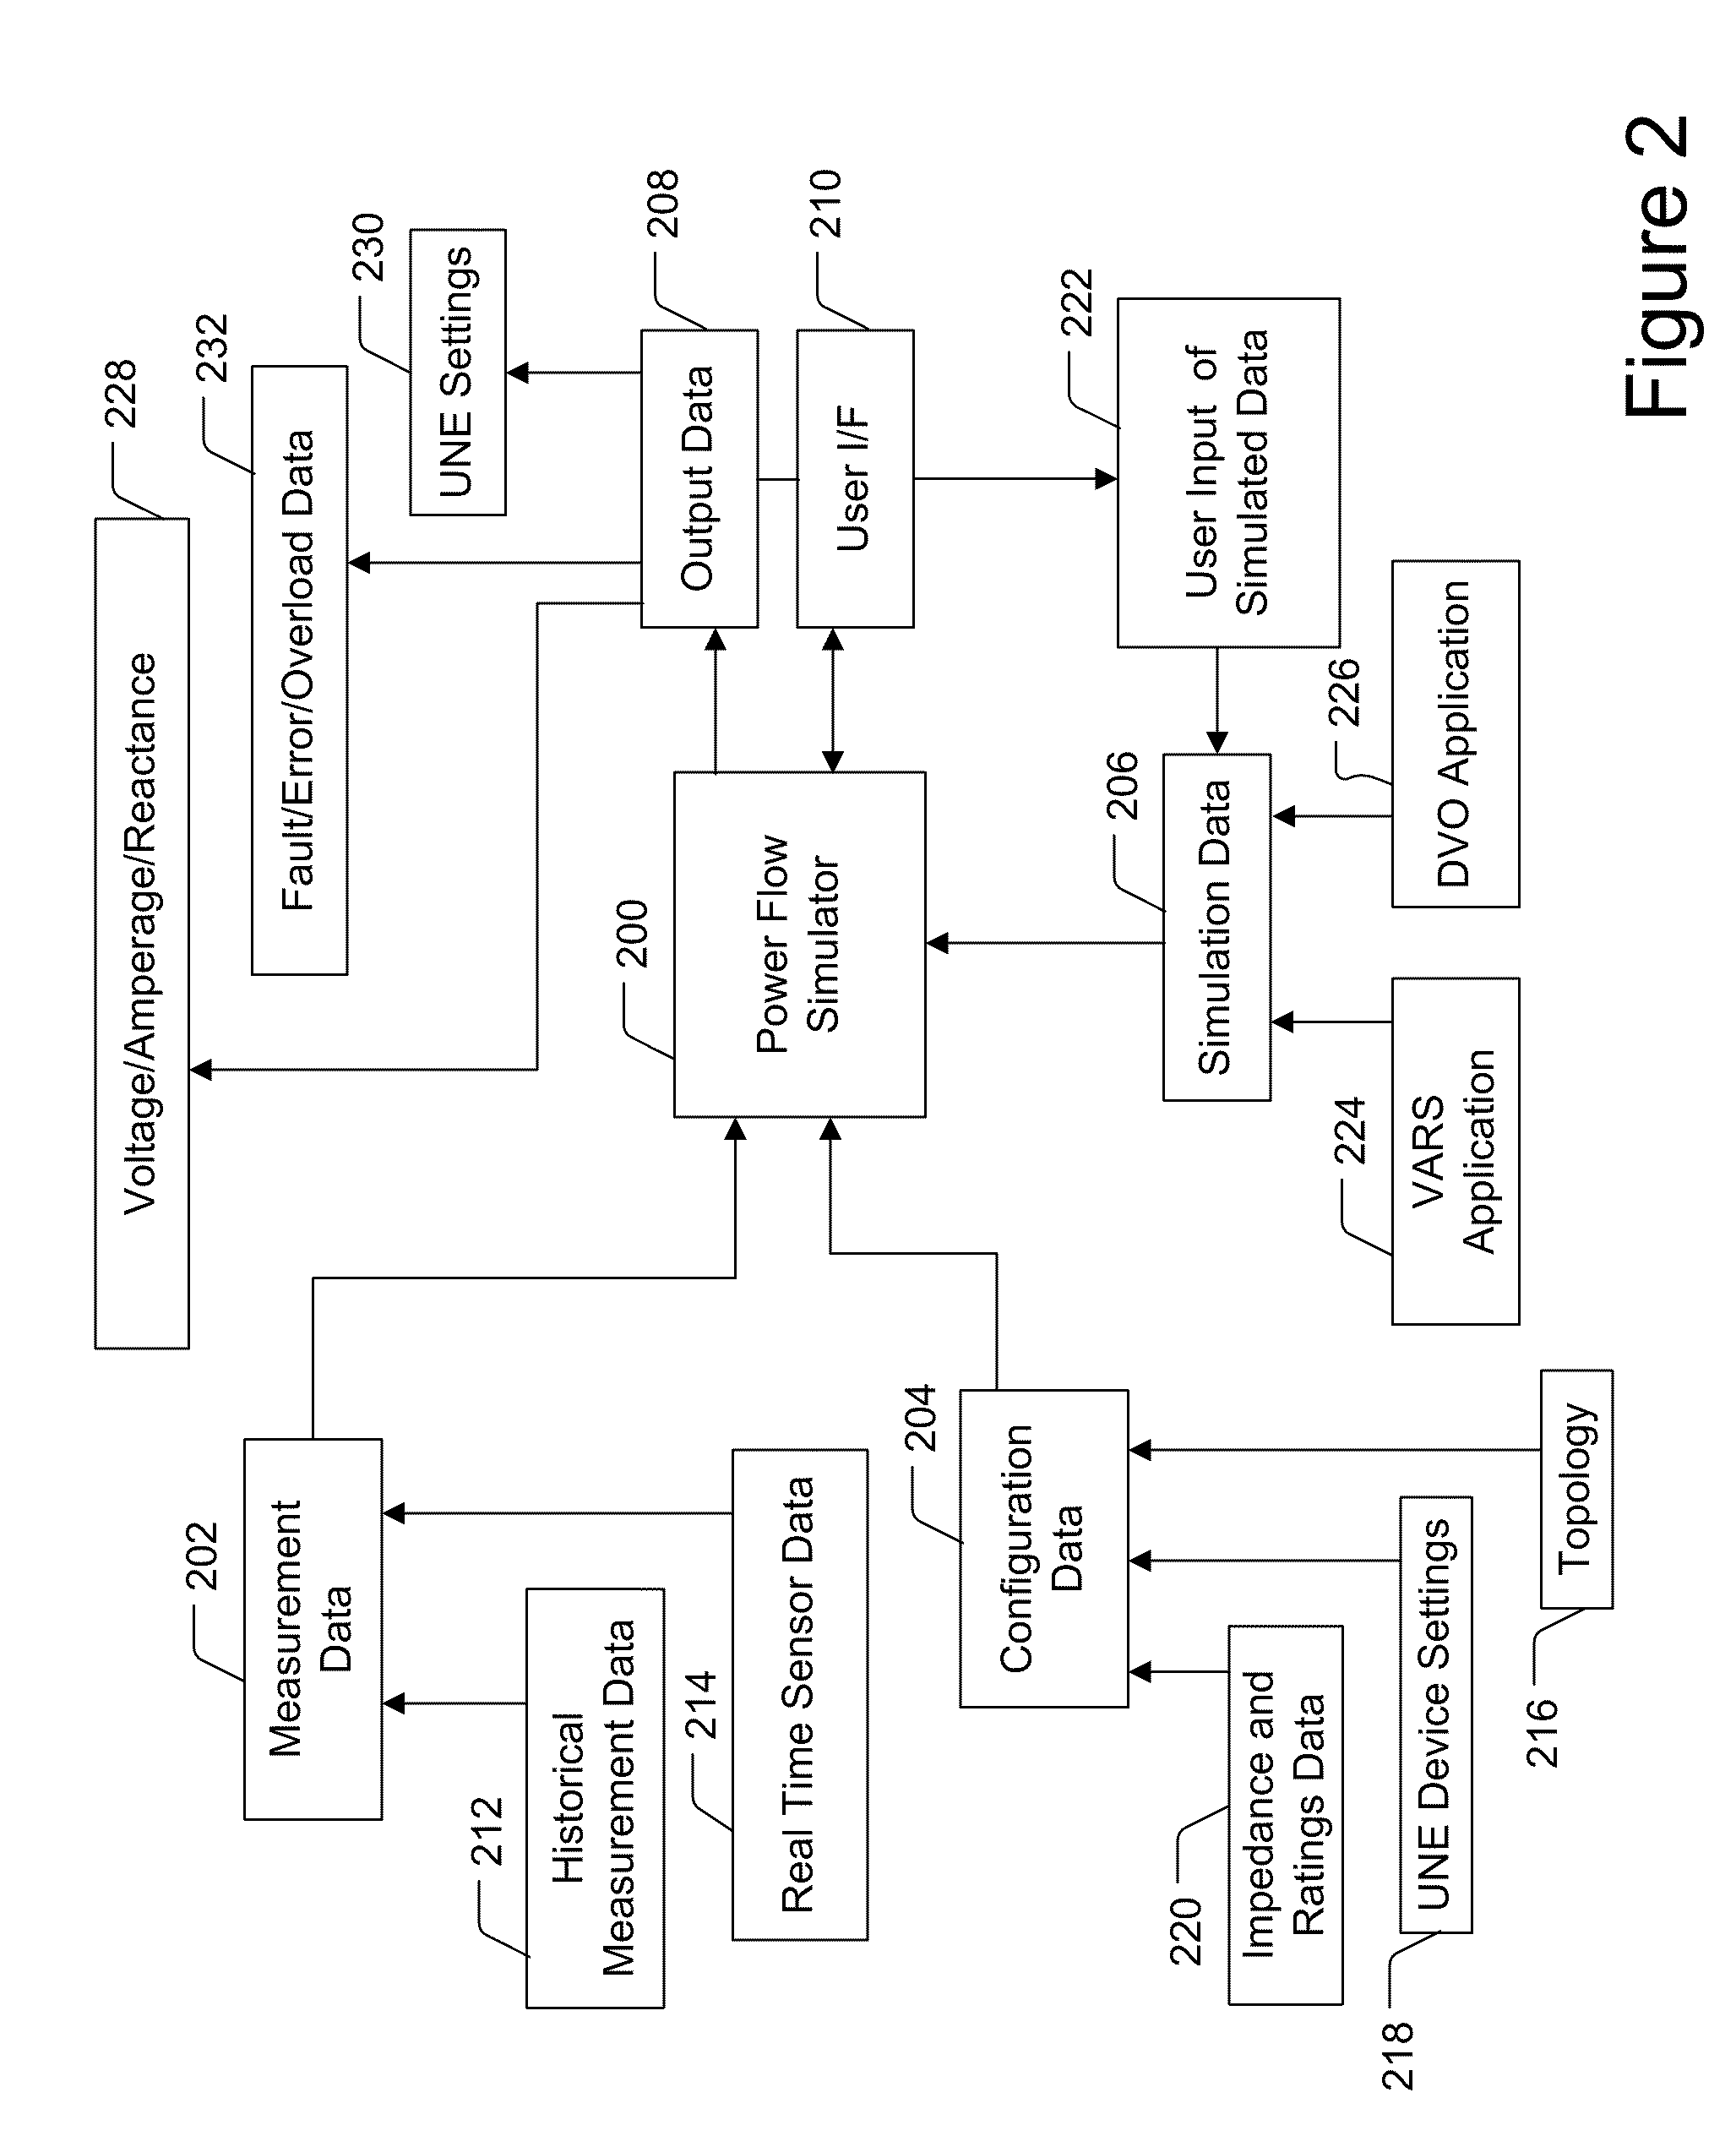 Power Flow Simulation System, Method and Device